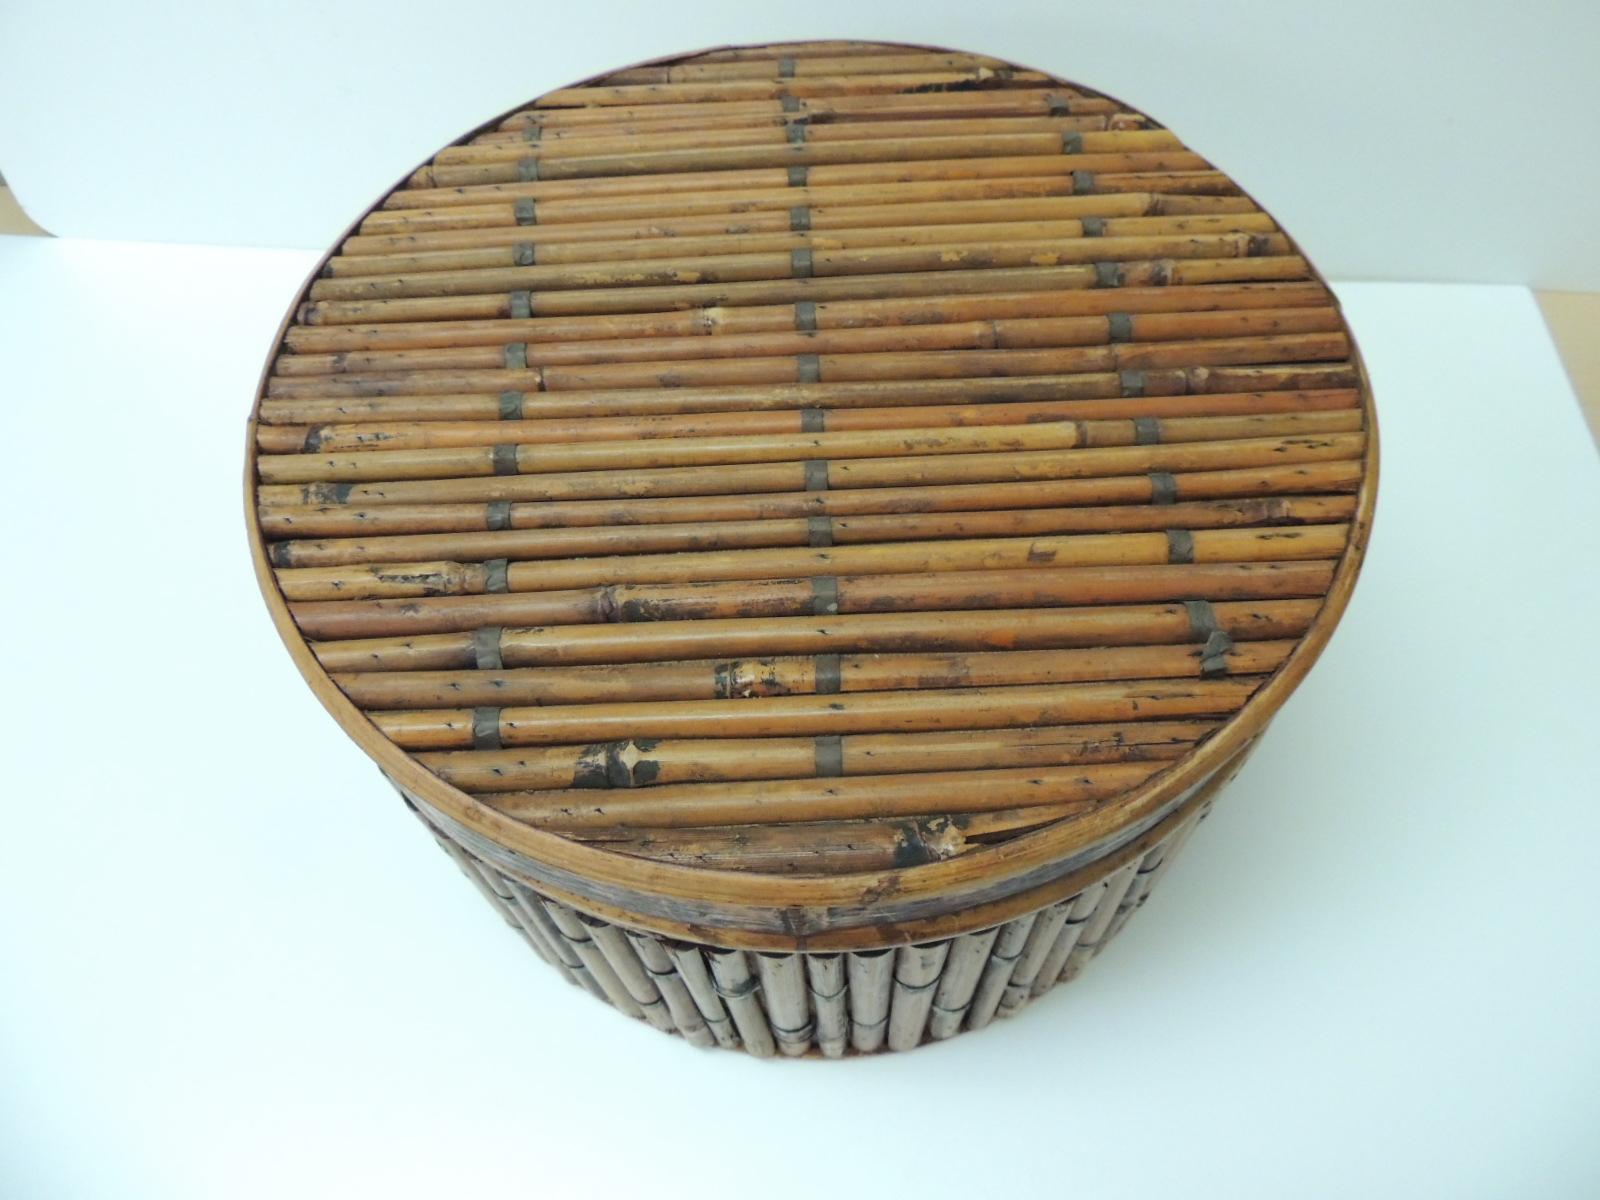 Vintage lidded round artisanal bamboo box with brass fittings
Size: 14.5 D x 7.5 H
Indonesia, 1980s.